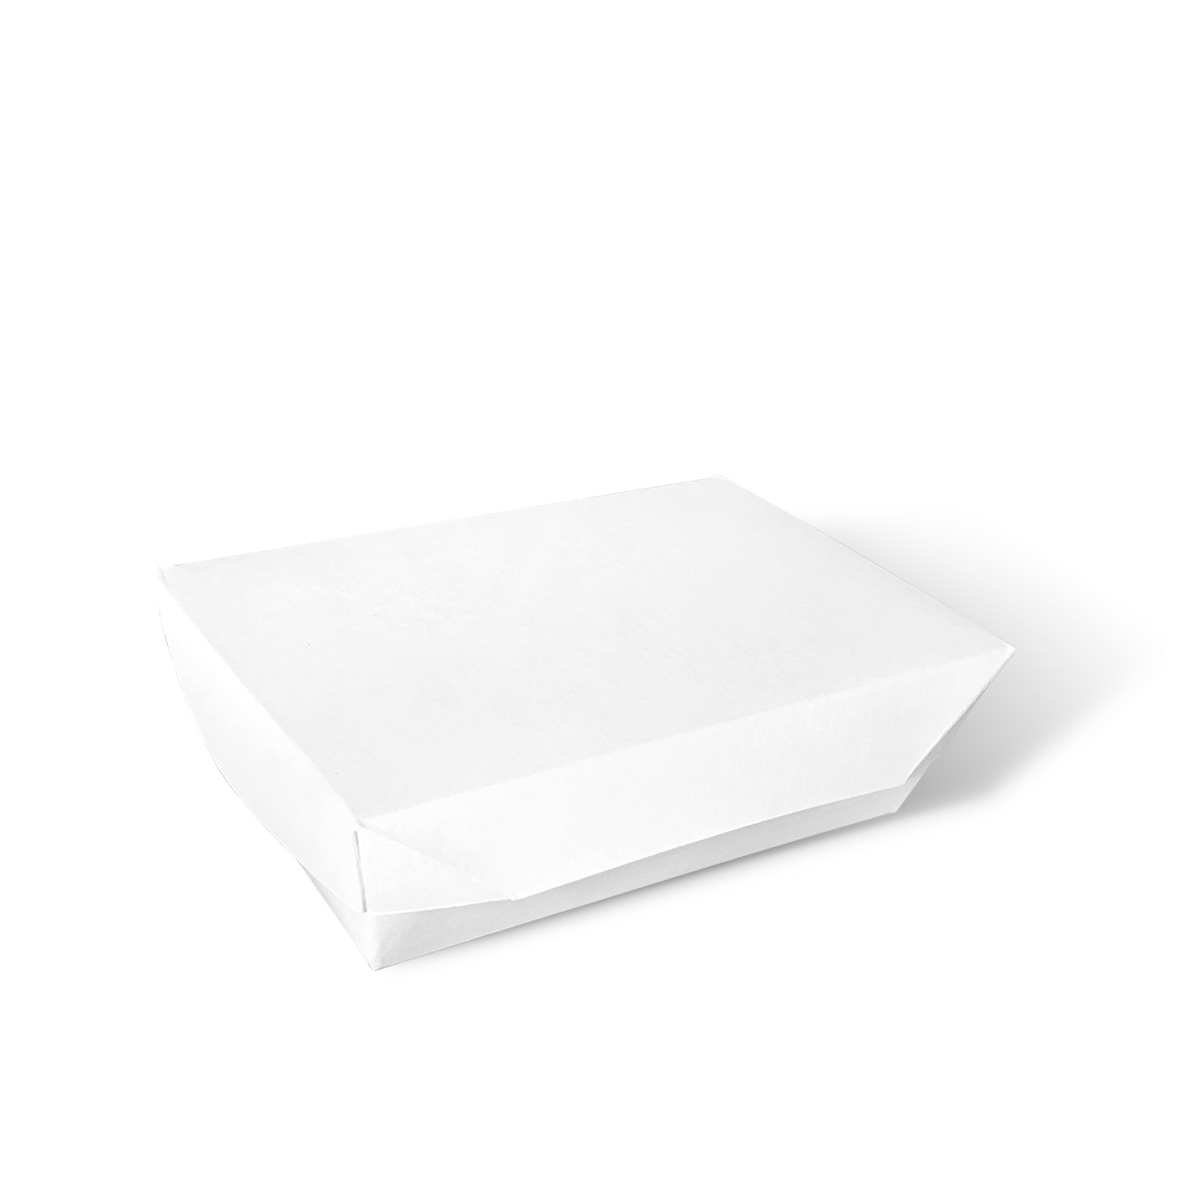 Large Paper Clamshell Food Box - Affinity Supply Co.